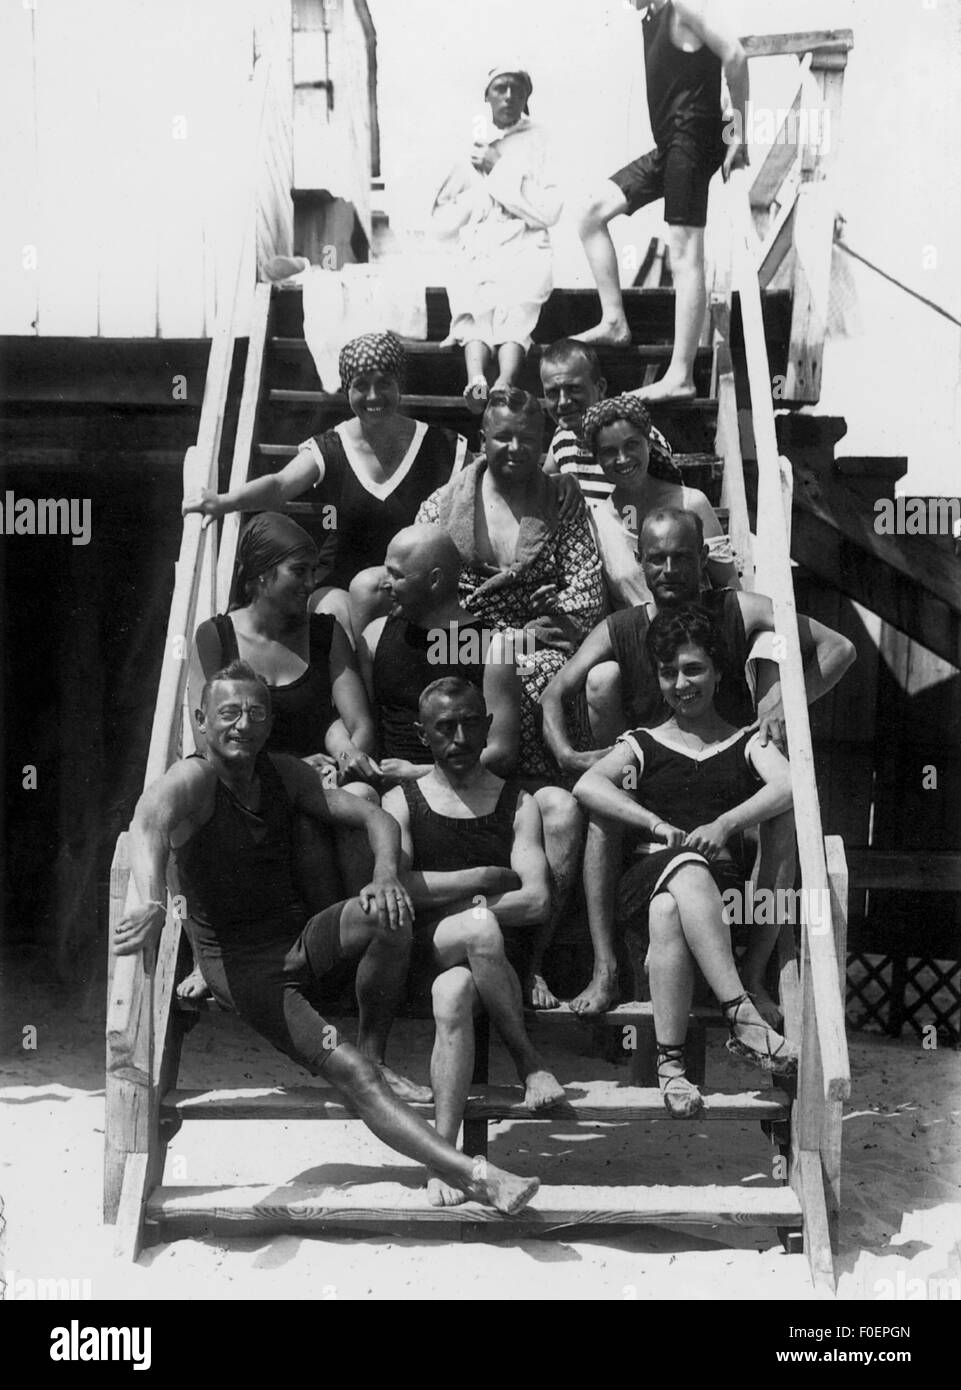 bathing, lido / open-air swimming pool, group by young people in bathing wear, picture postcard, 1920, Additional-Rights-Clearences-Not Available Stock Photo